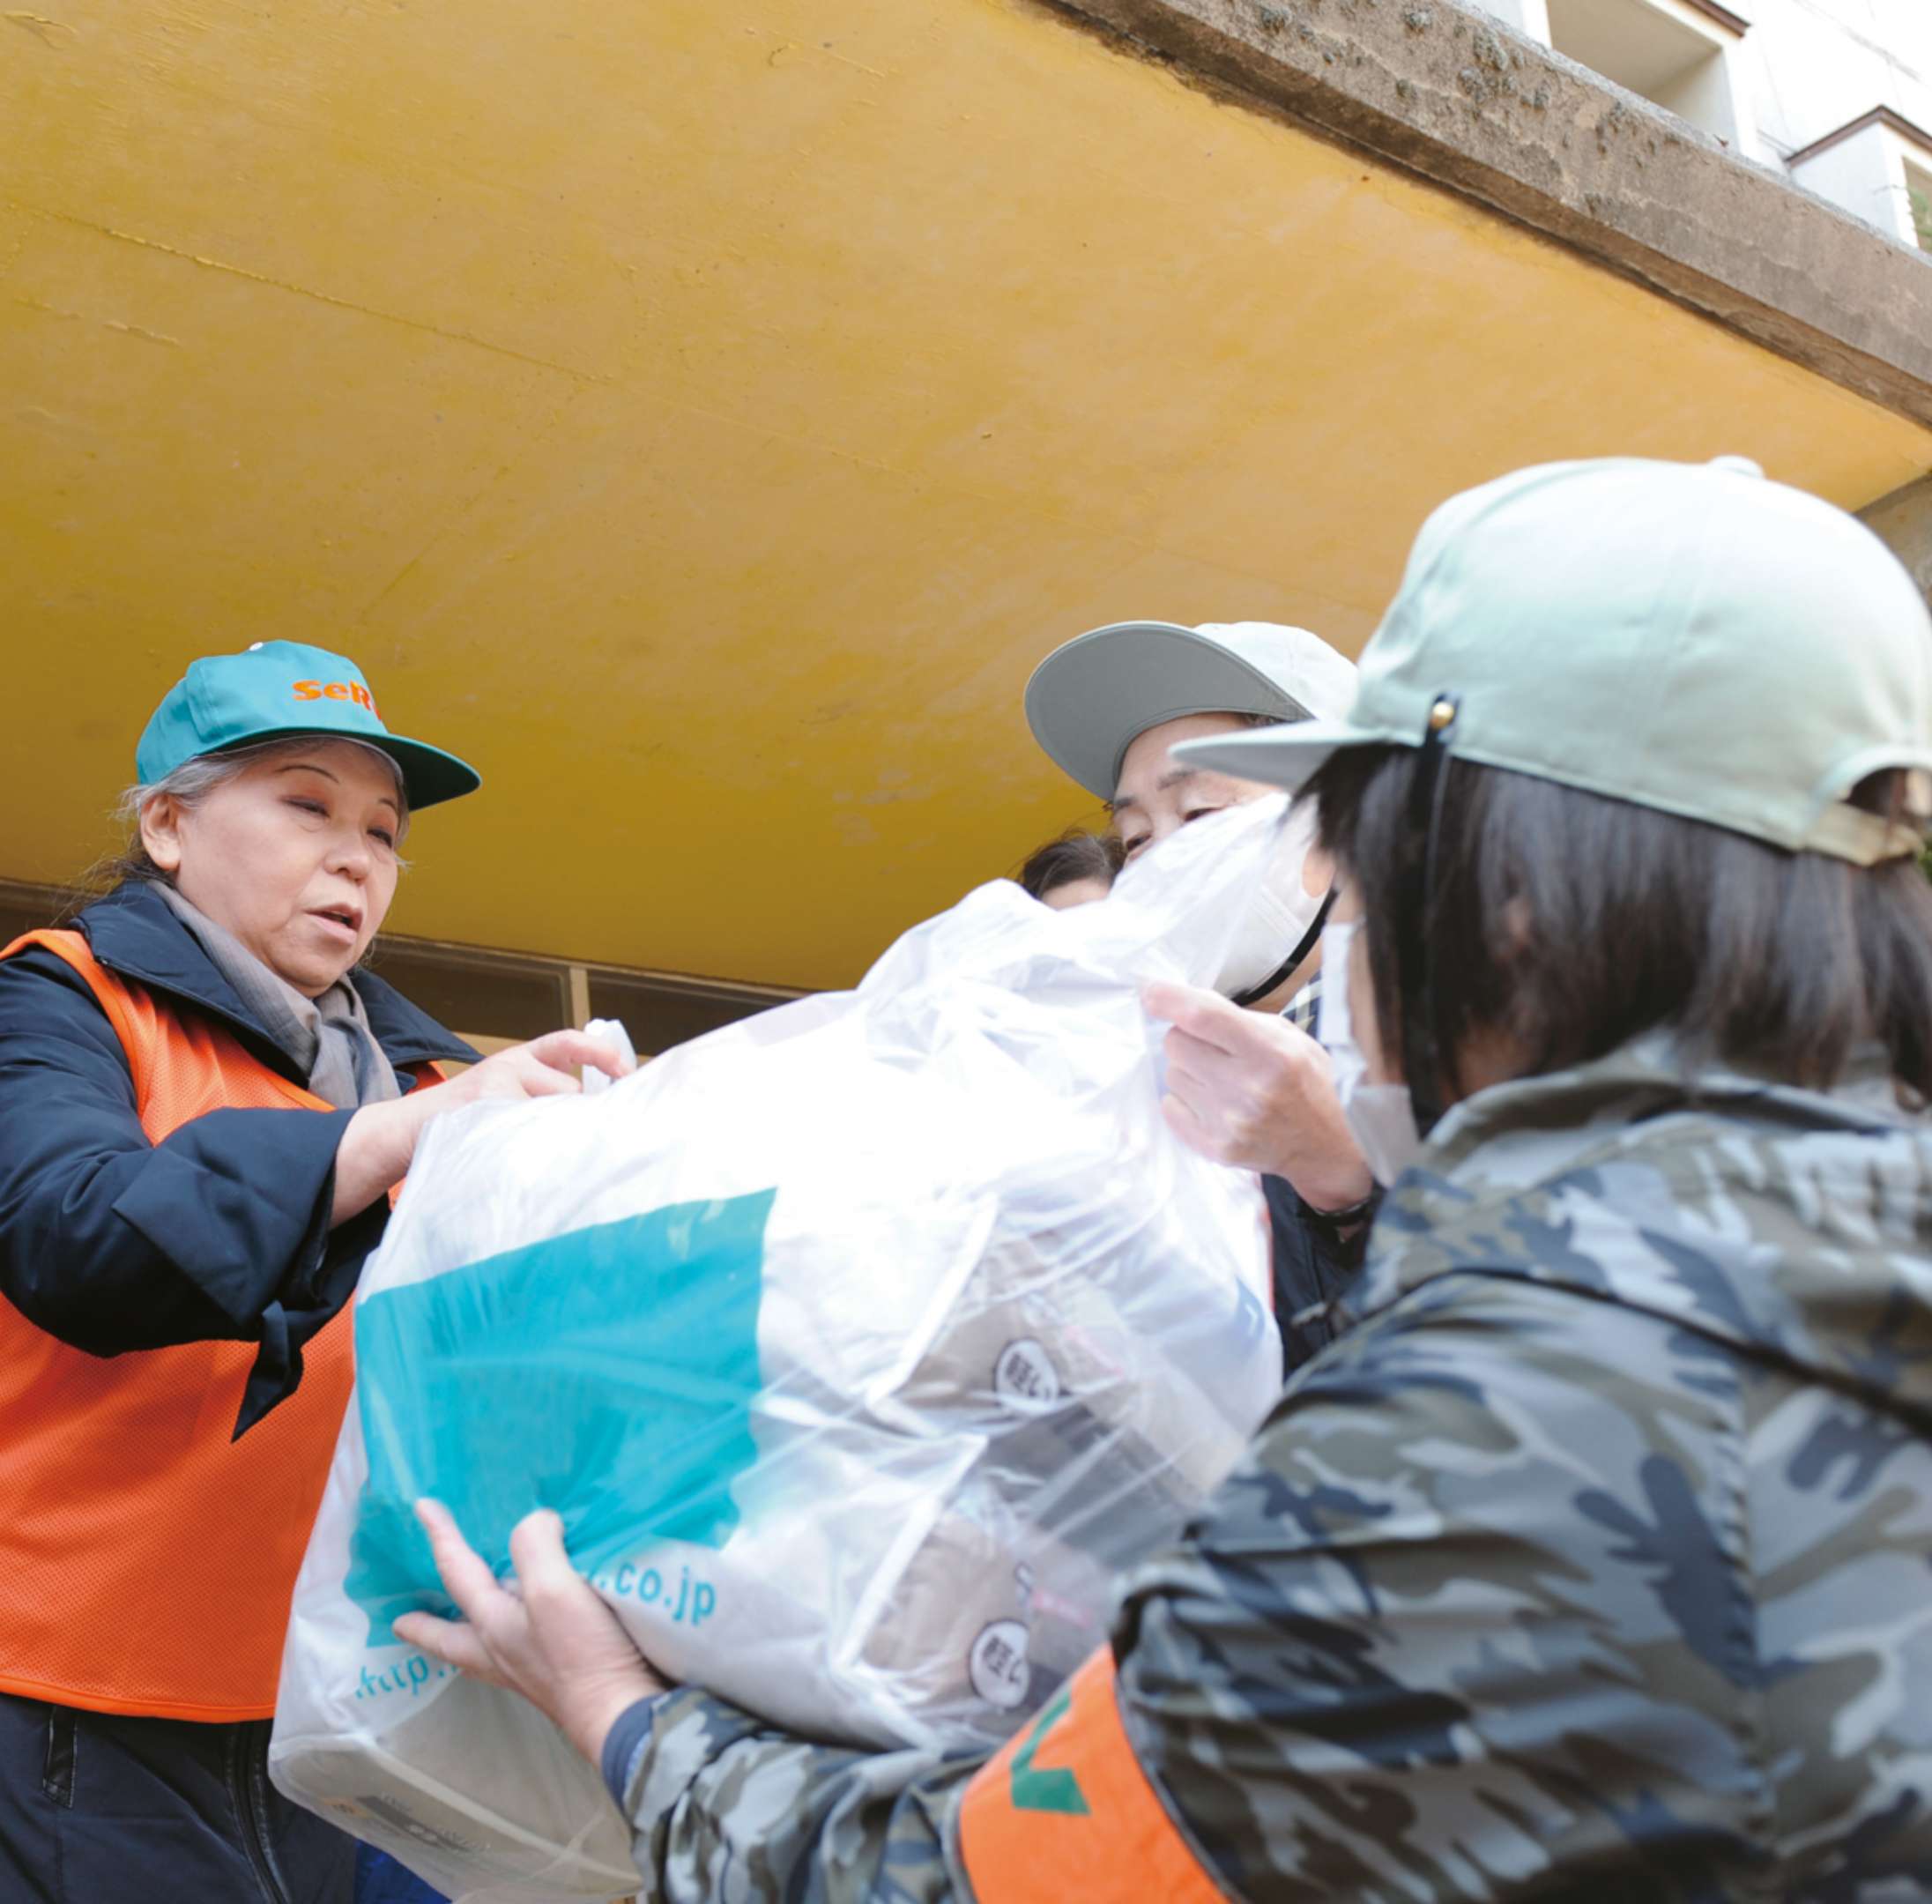 Her Holiness, wearing an orange safety vest and SEVA ballcap, passes a bag of relief supplies to people wearing caps and masks.